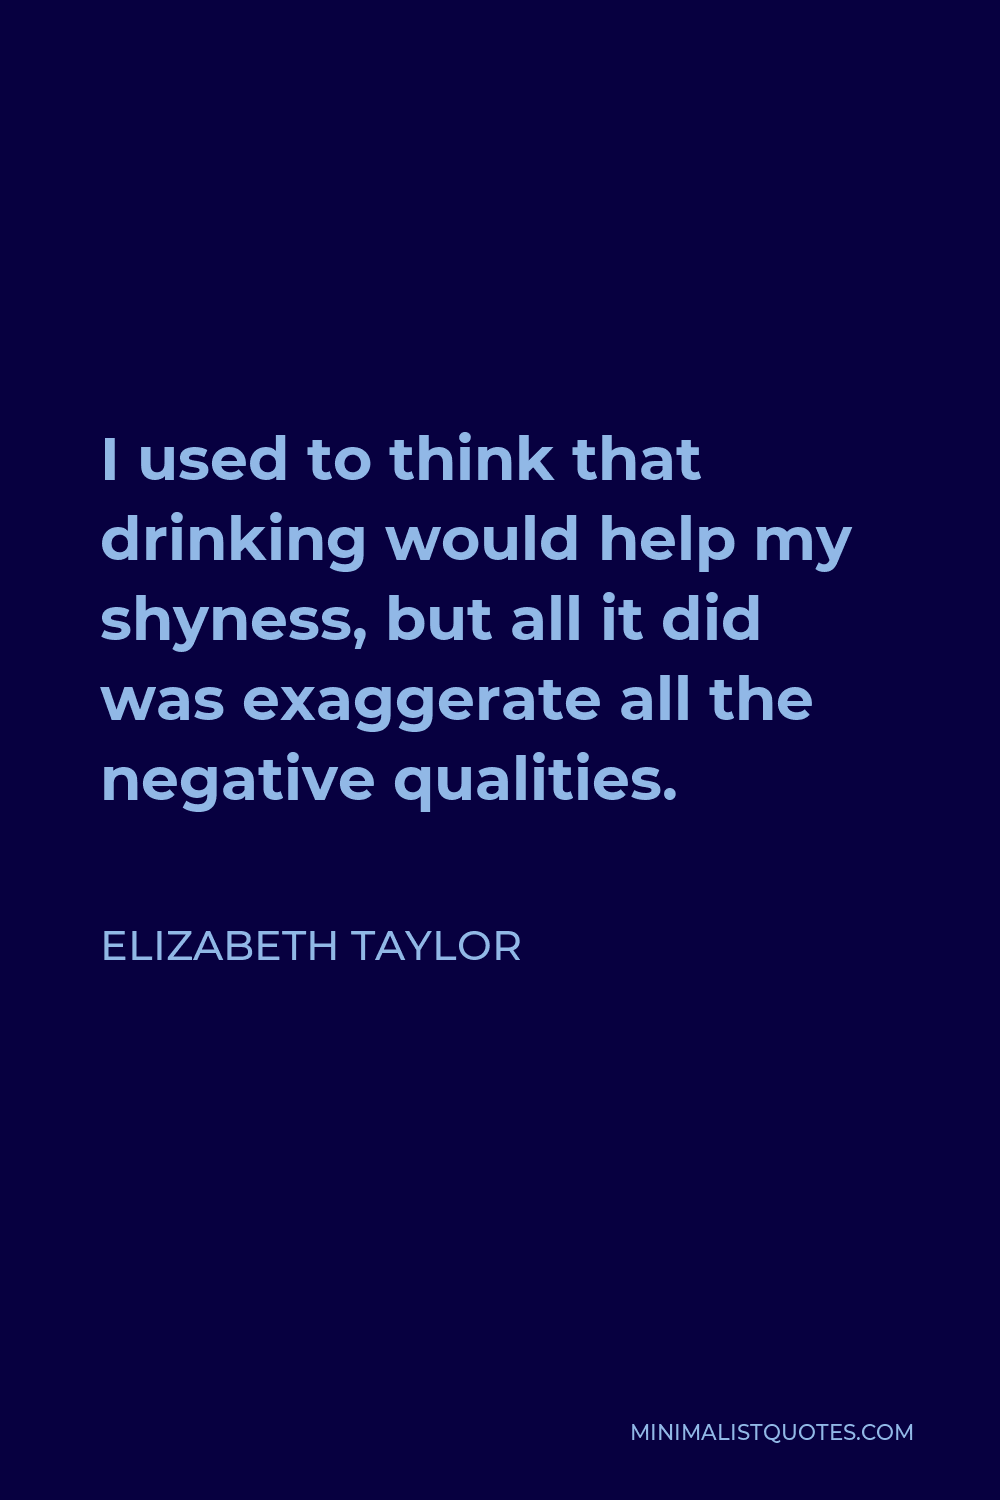 Elizabeth Taylor Quote - I used to think that drinking would help my shyness, but all it did was exaggerate all the negative qualities.